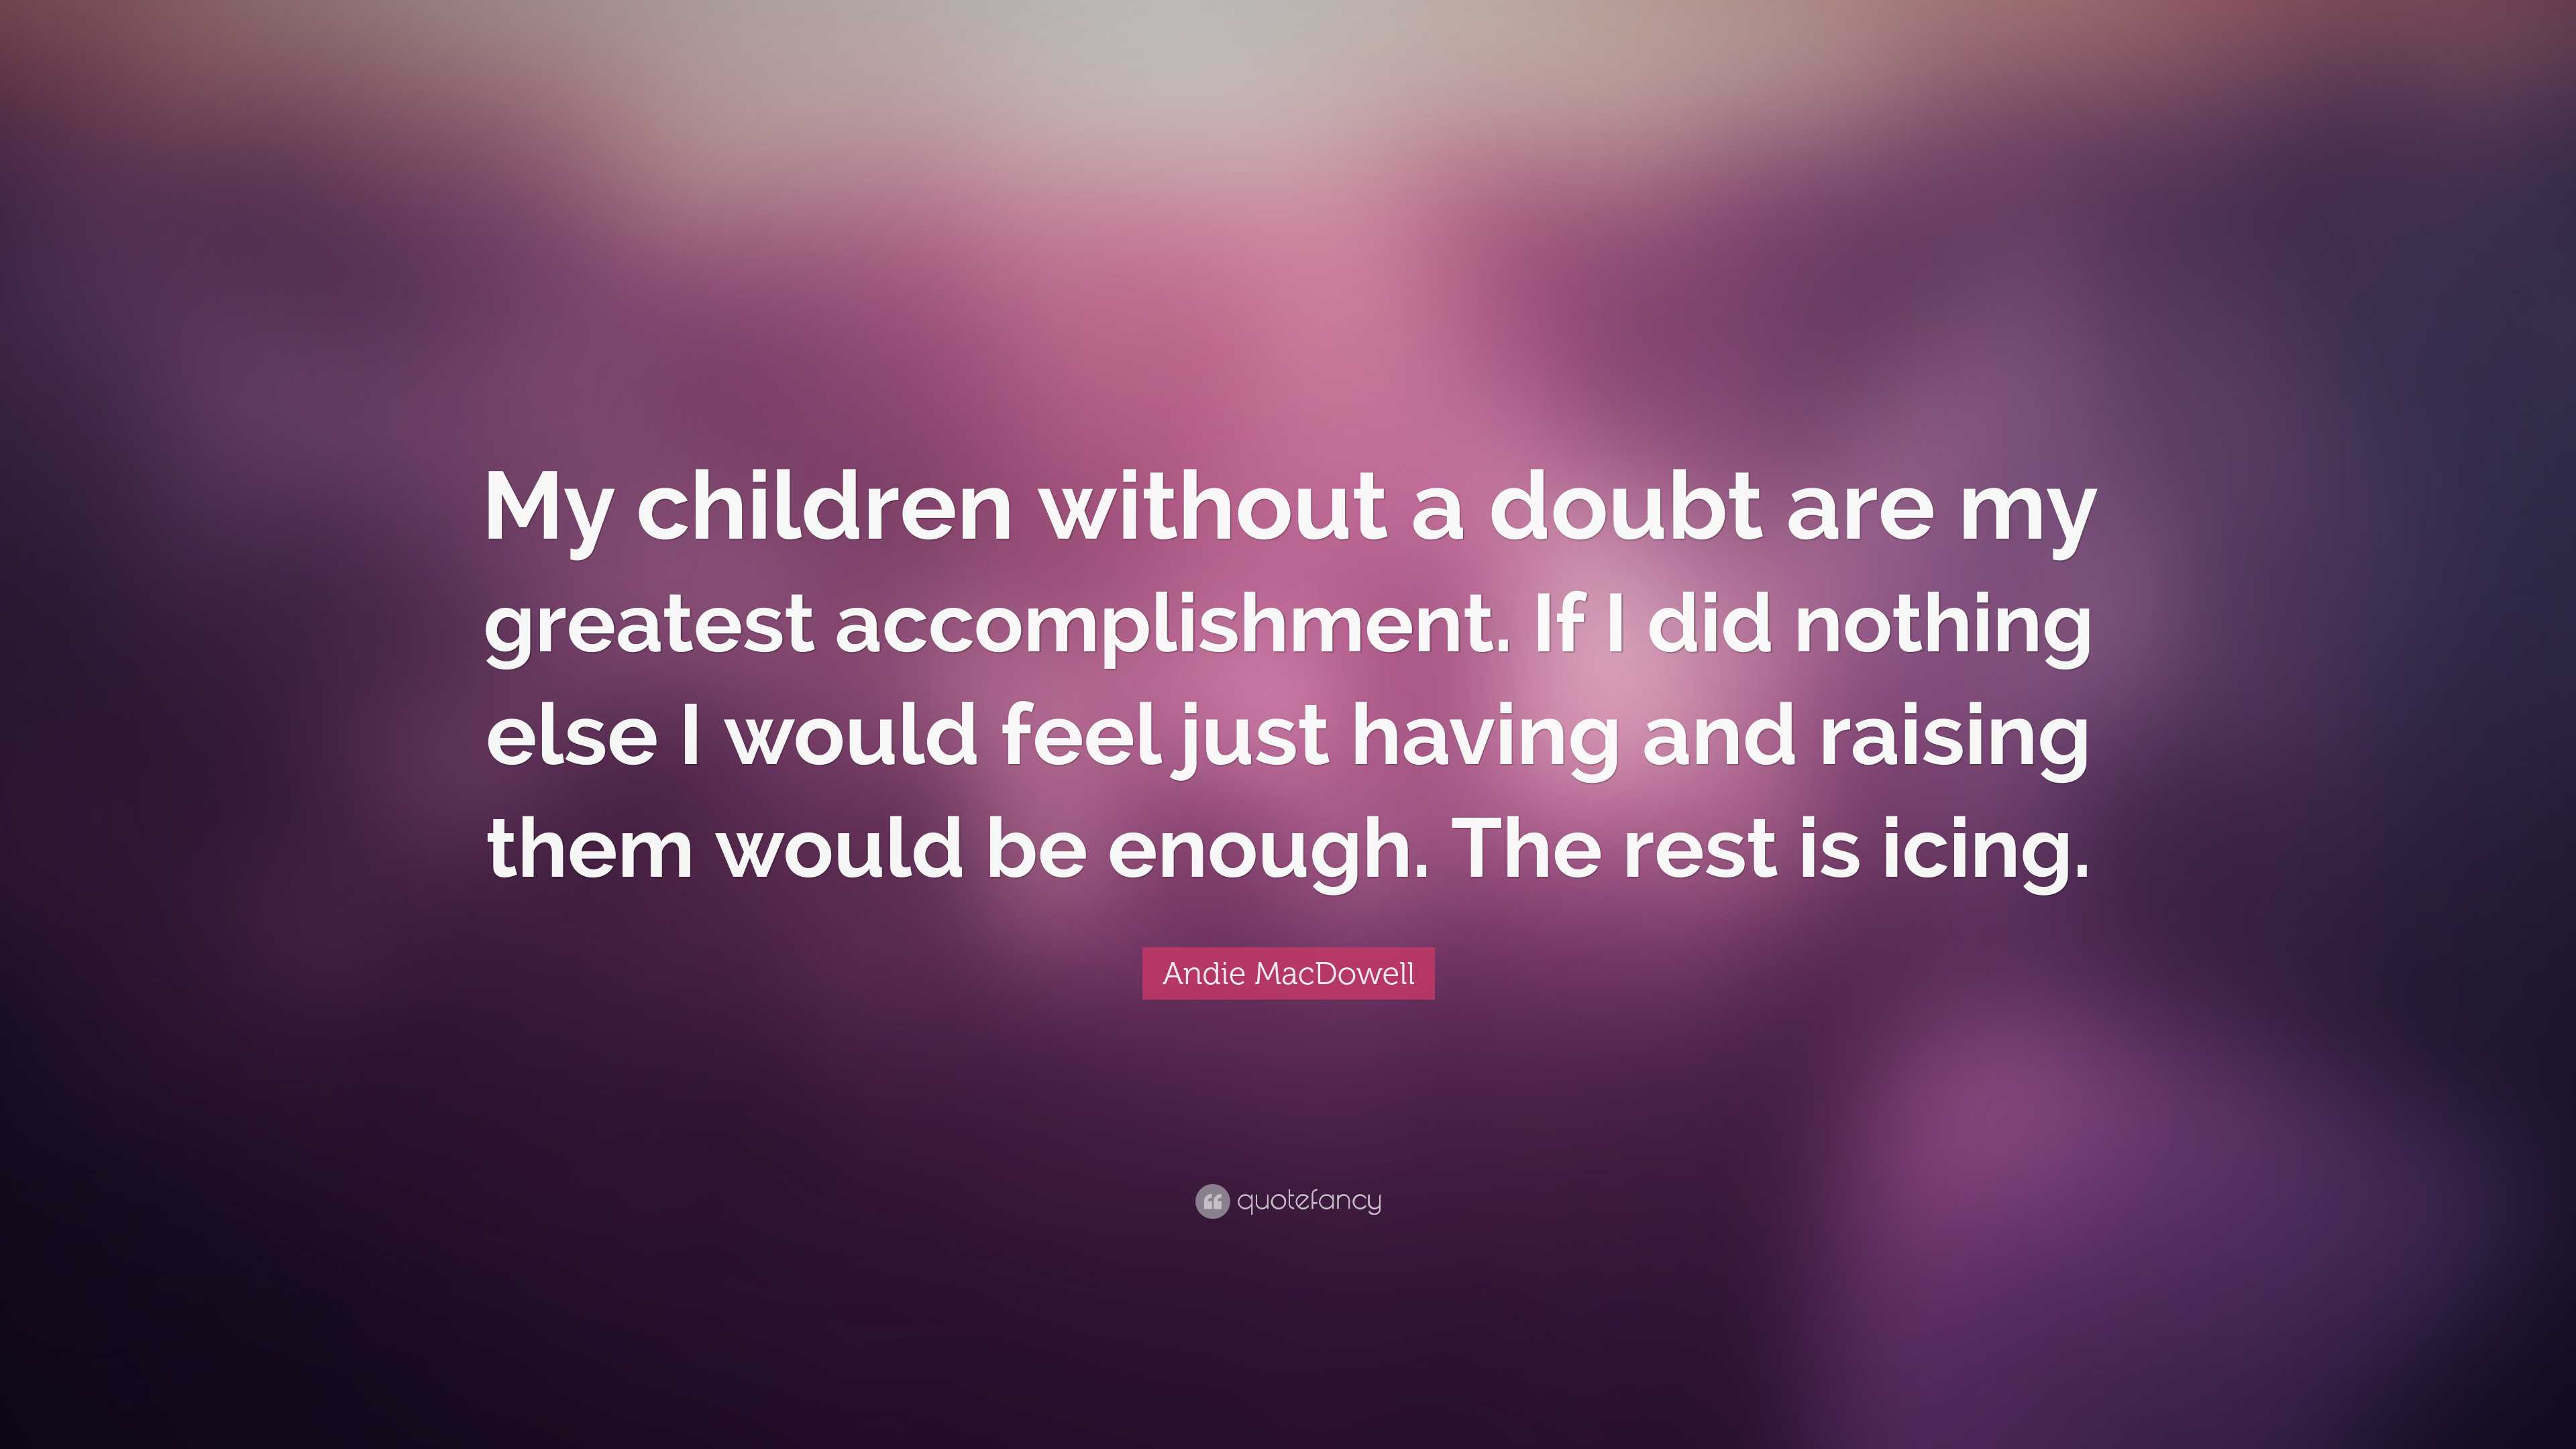 Andie MacDowell Quote: “My children without a doubt are my greatest ...